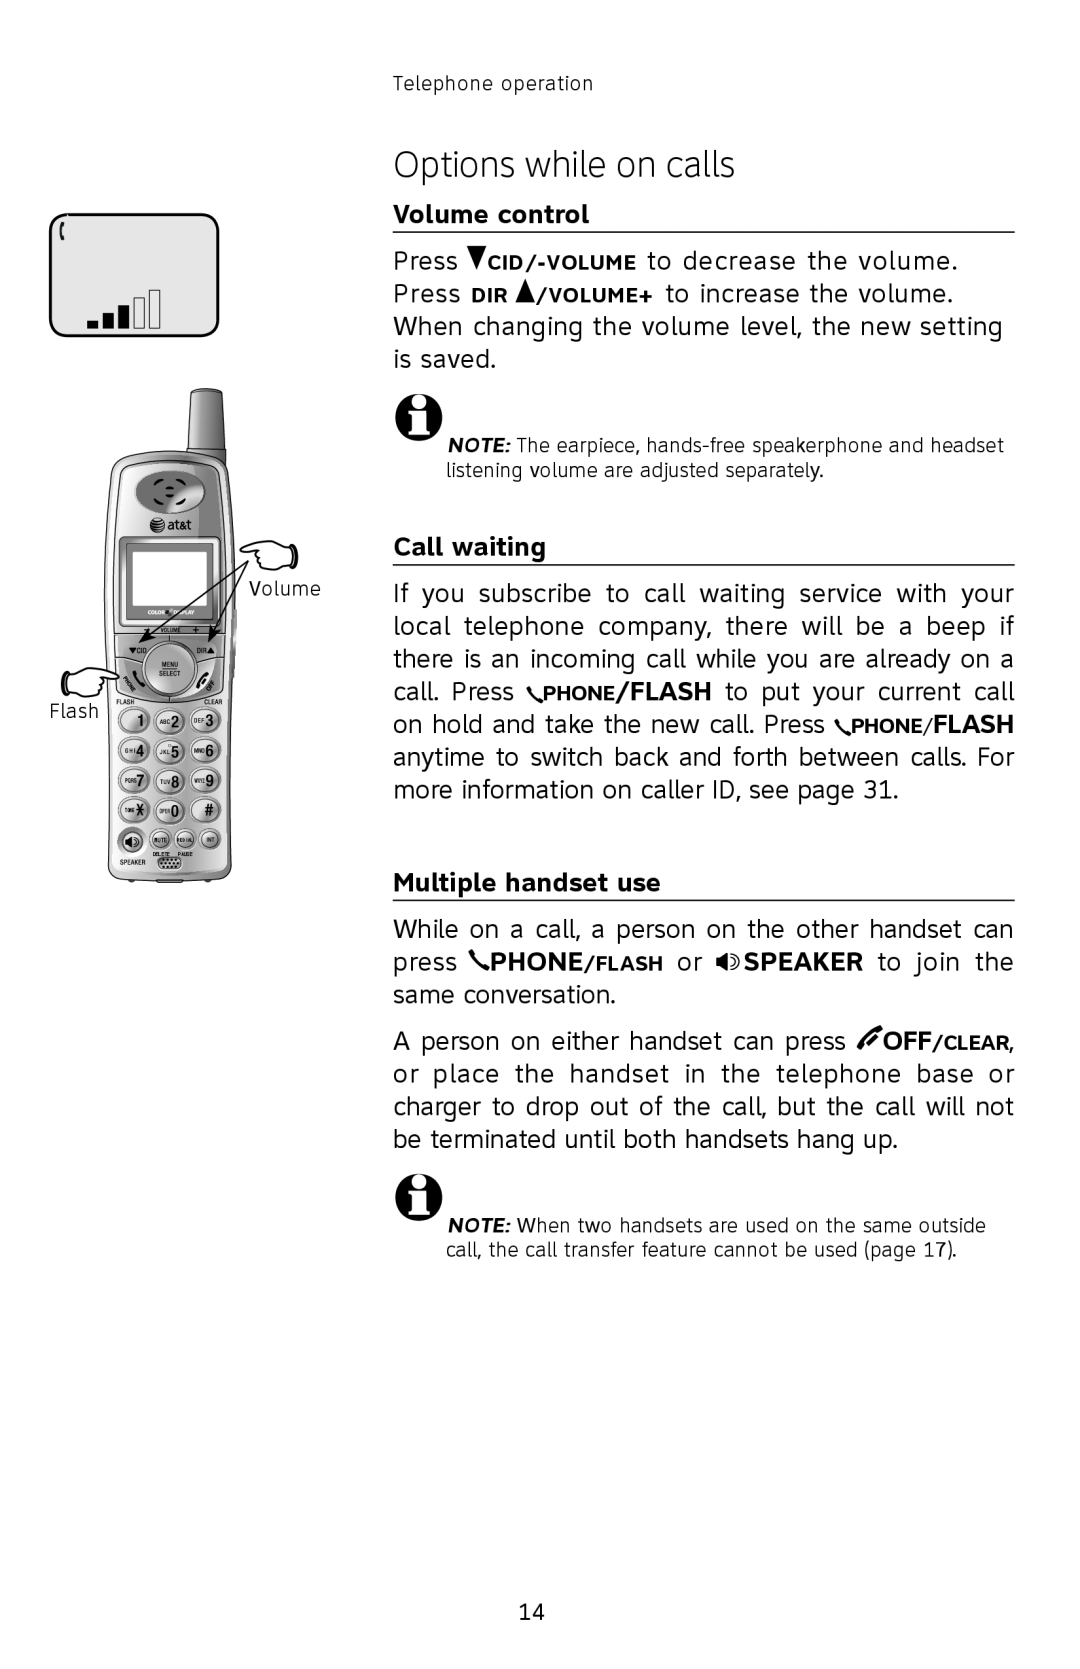 AT&T E2912 user manual Options while on calls, Volume control, Call waiting, Multiple handset use 